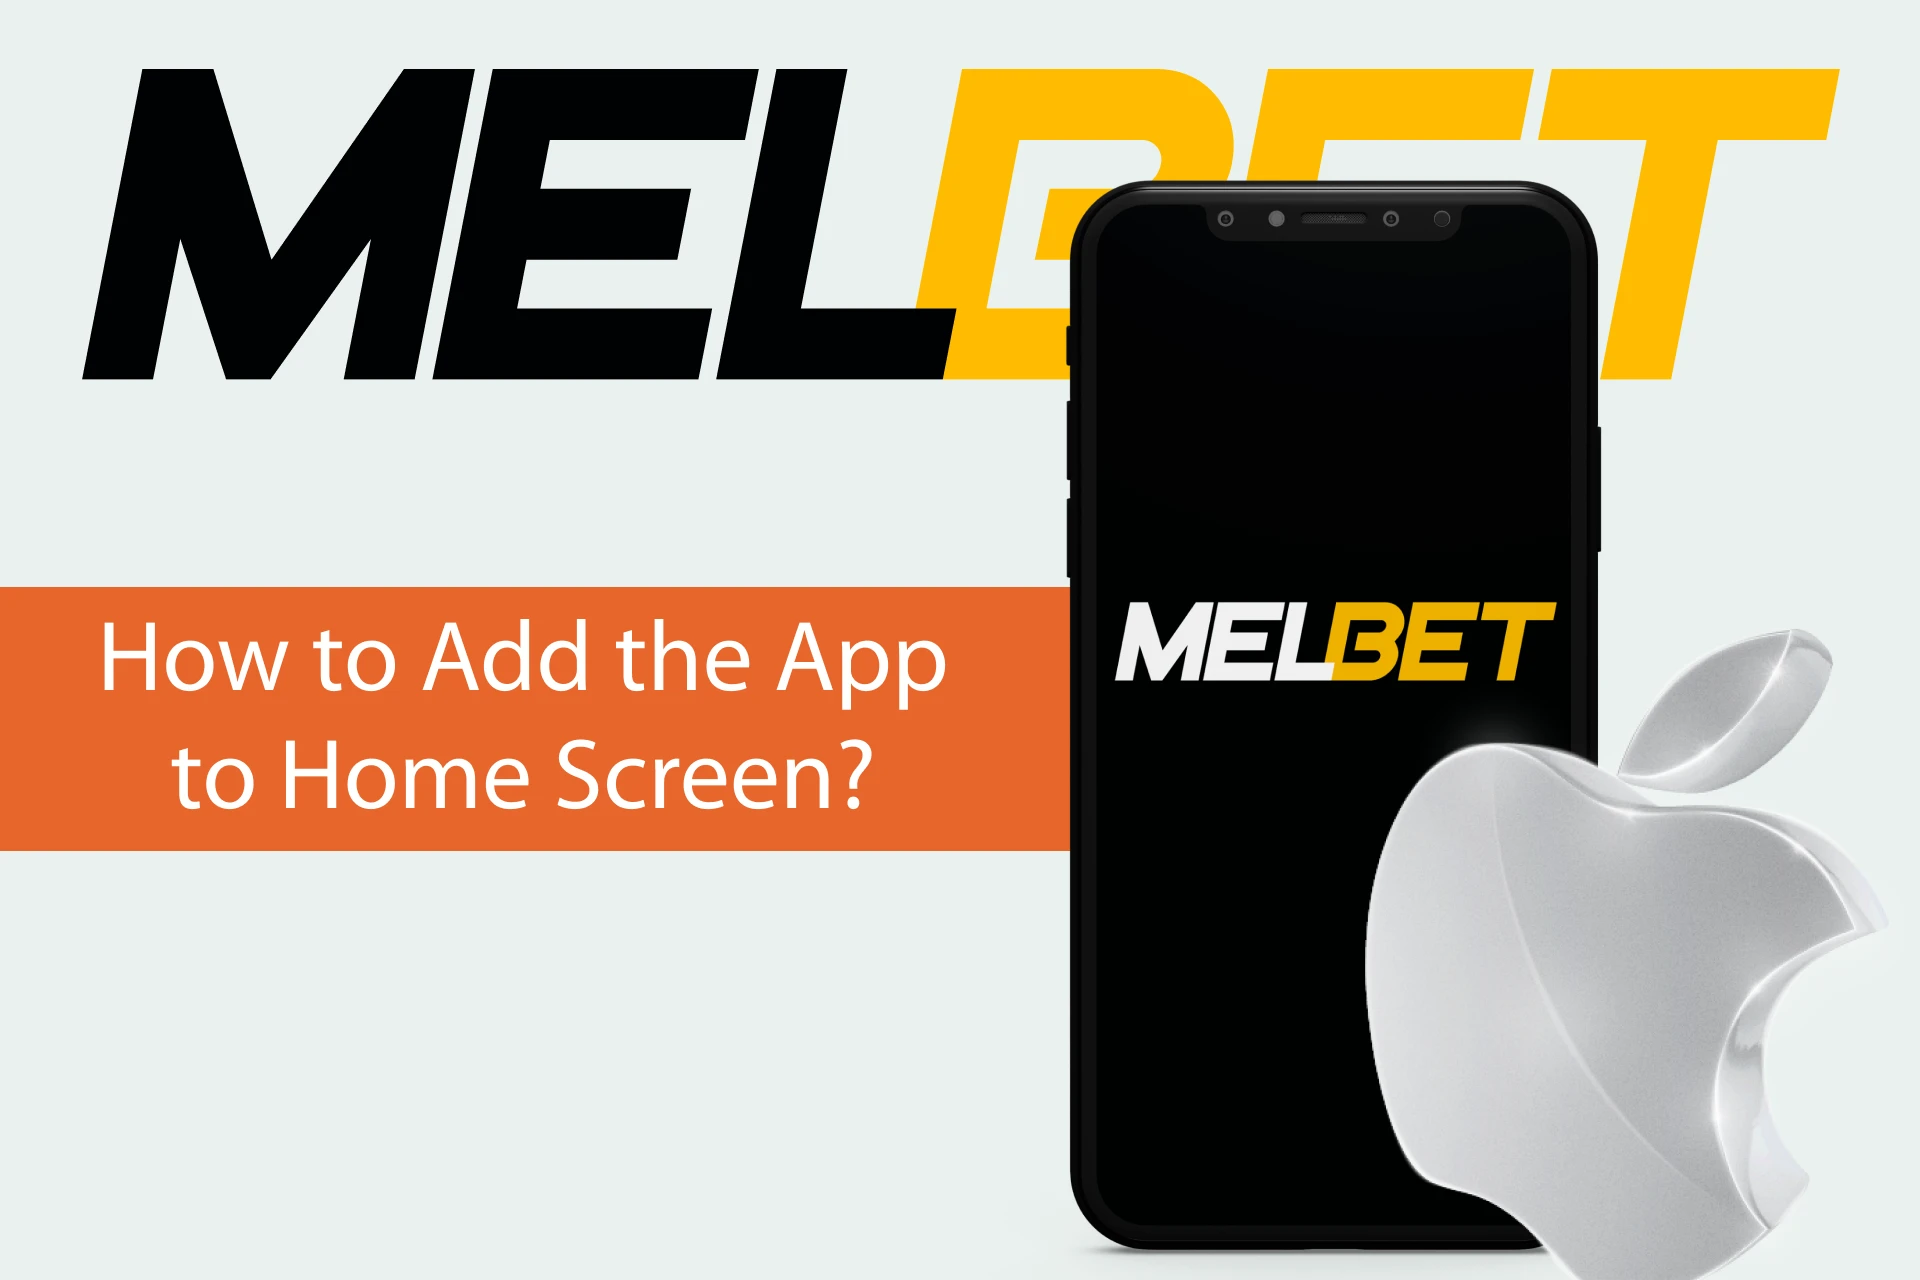 Follow these steps to add the Melbet app to your iOS home screen.